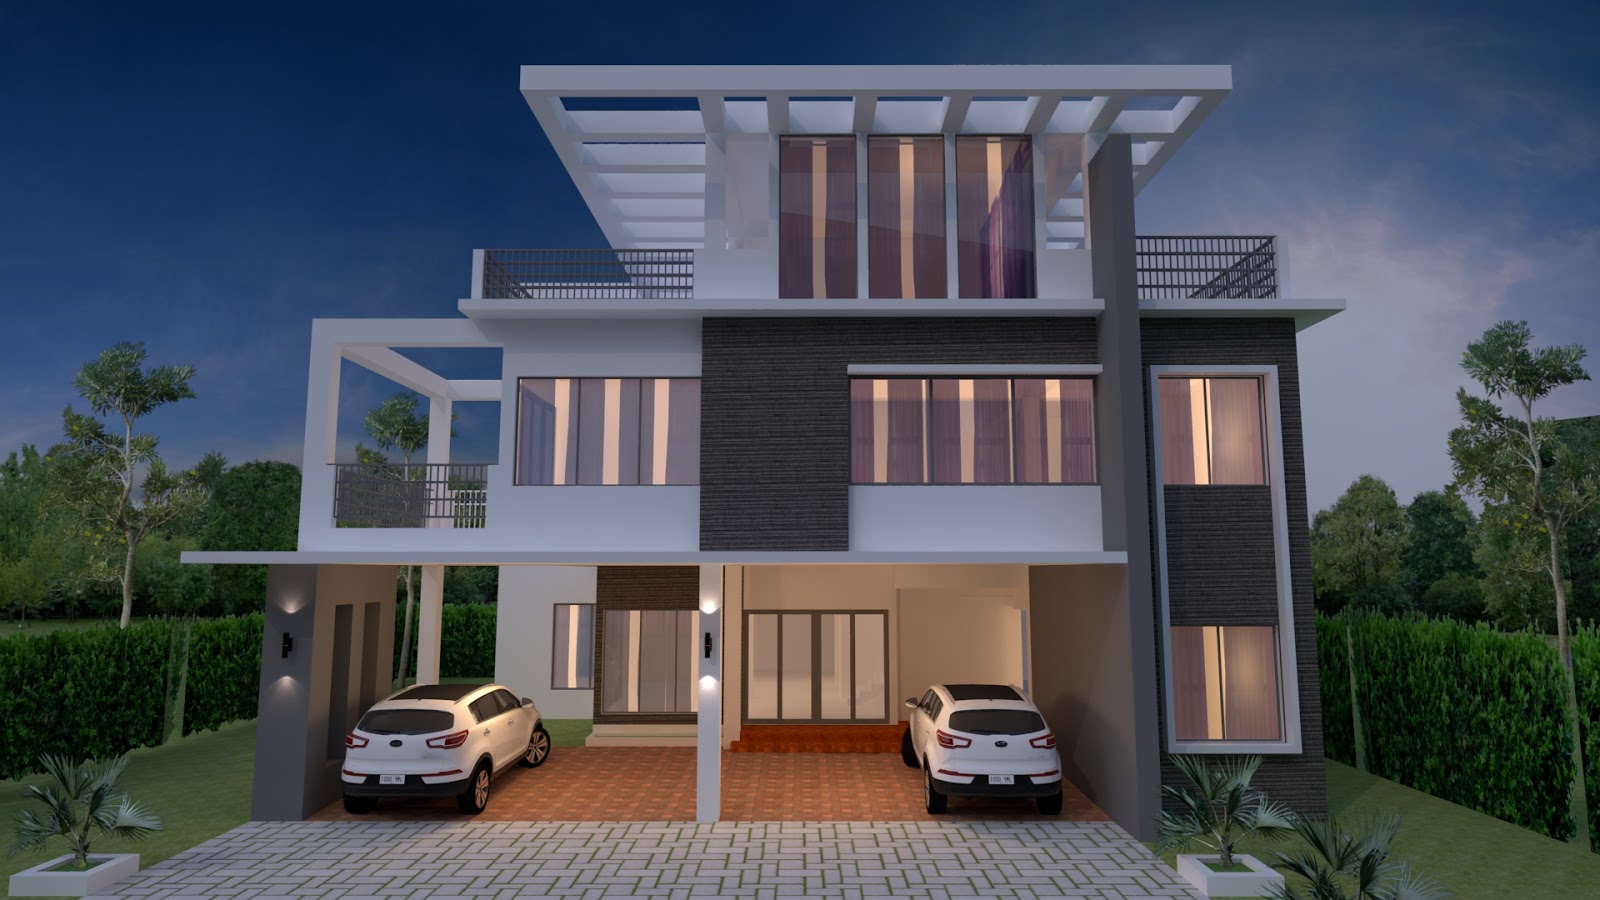 Sketchup house design - rewhsacharge